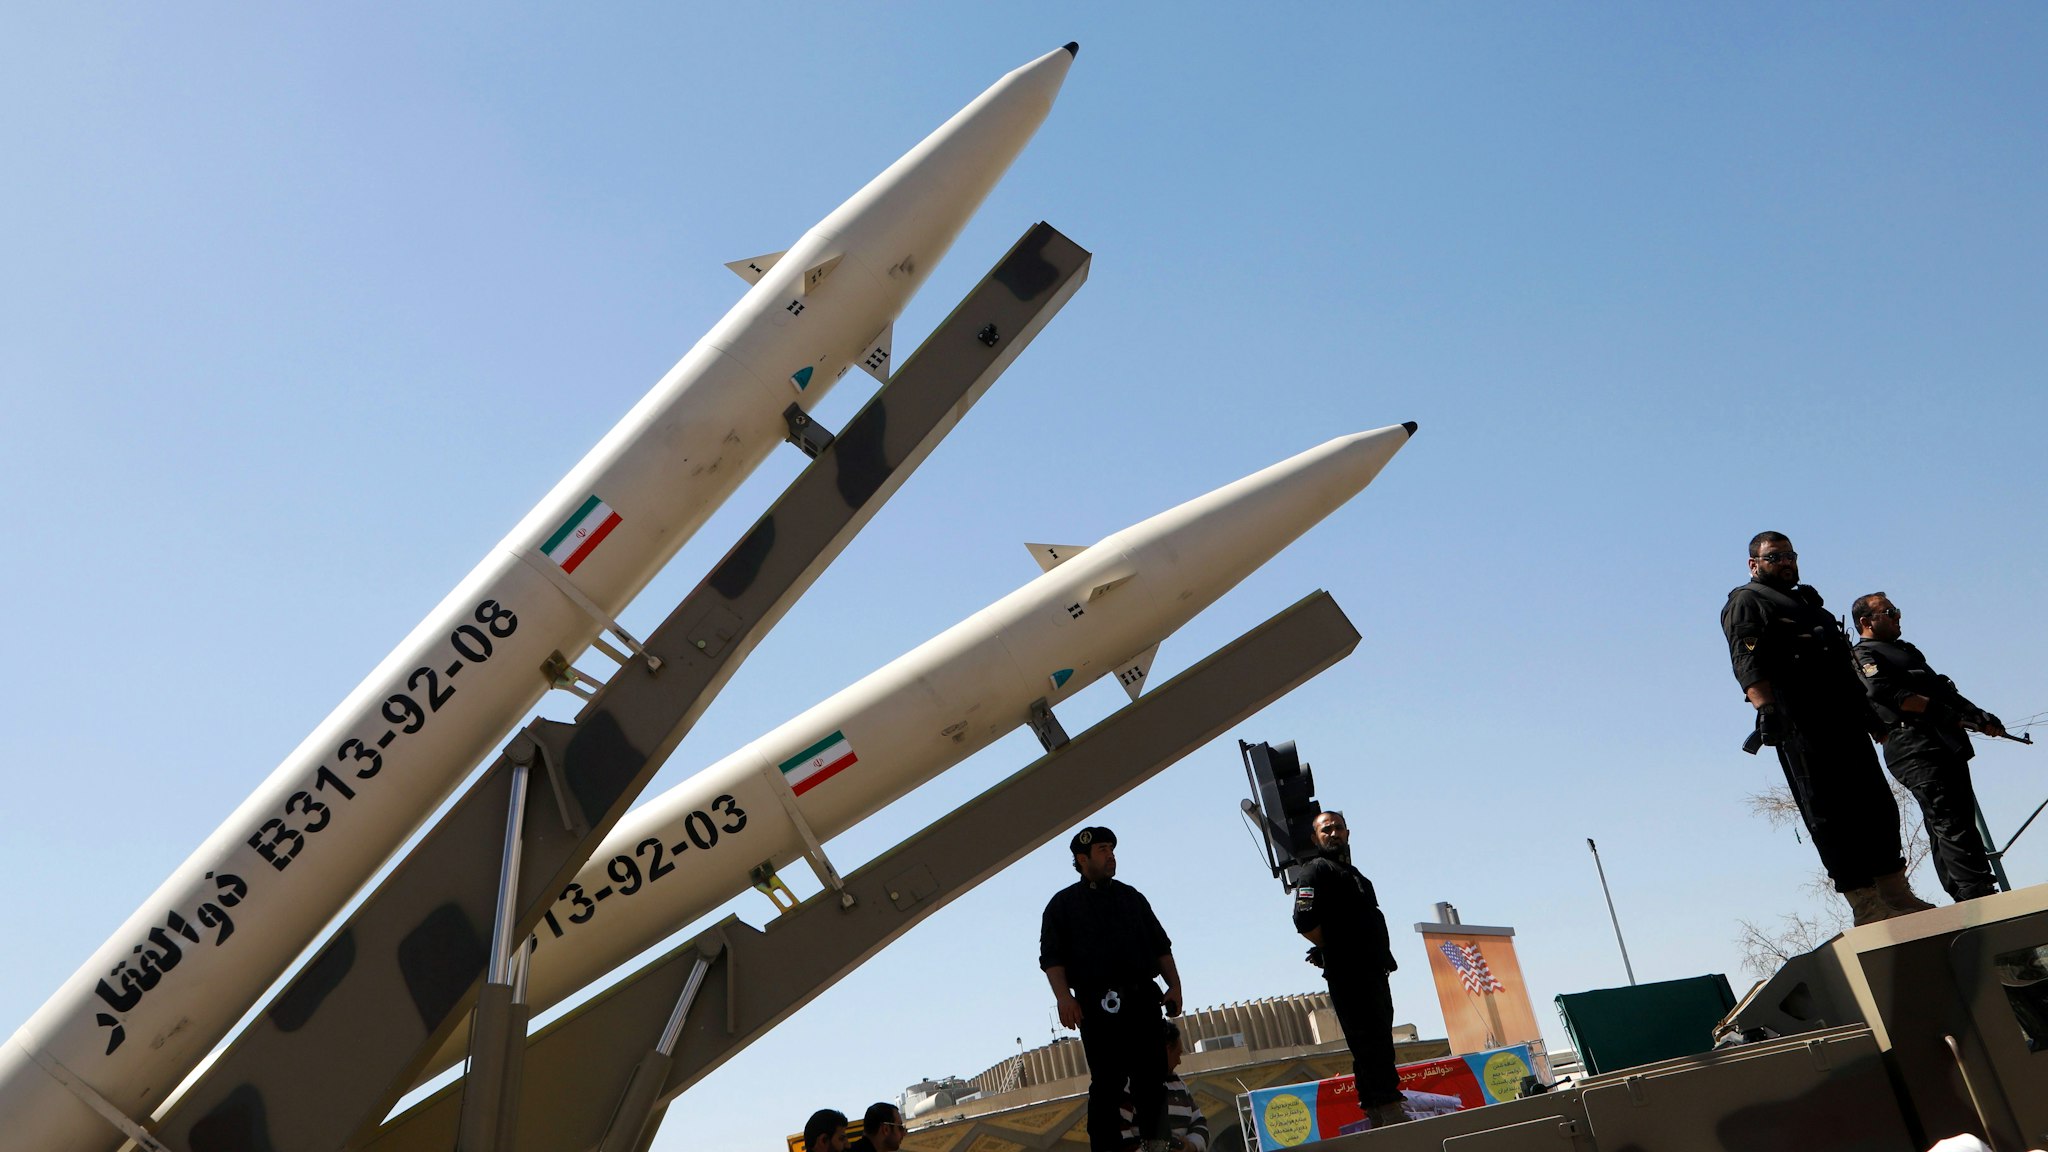 Zolfaghar missiles (R) are displayed during a rally marking al-Quds (Jerusalem) Day in Tehran on June 23, 2017. Chants against the Saudi royal family and the Islamic State group mingled with the traditional cries of "Death to Israel" and "Death to America" at Jerusalem Day rallies across Iran today.